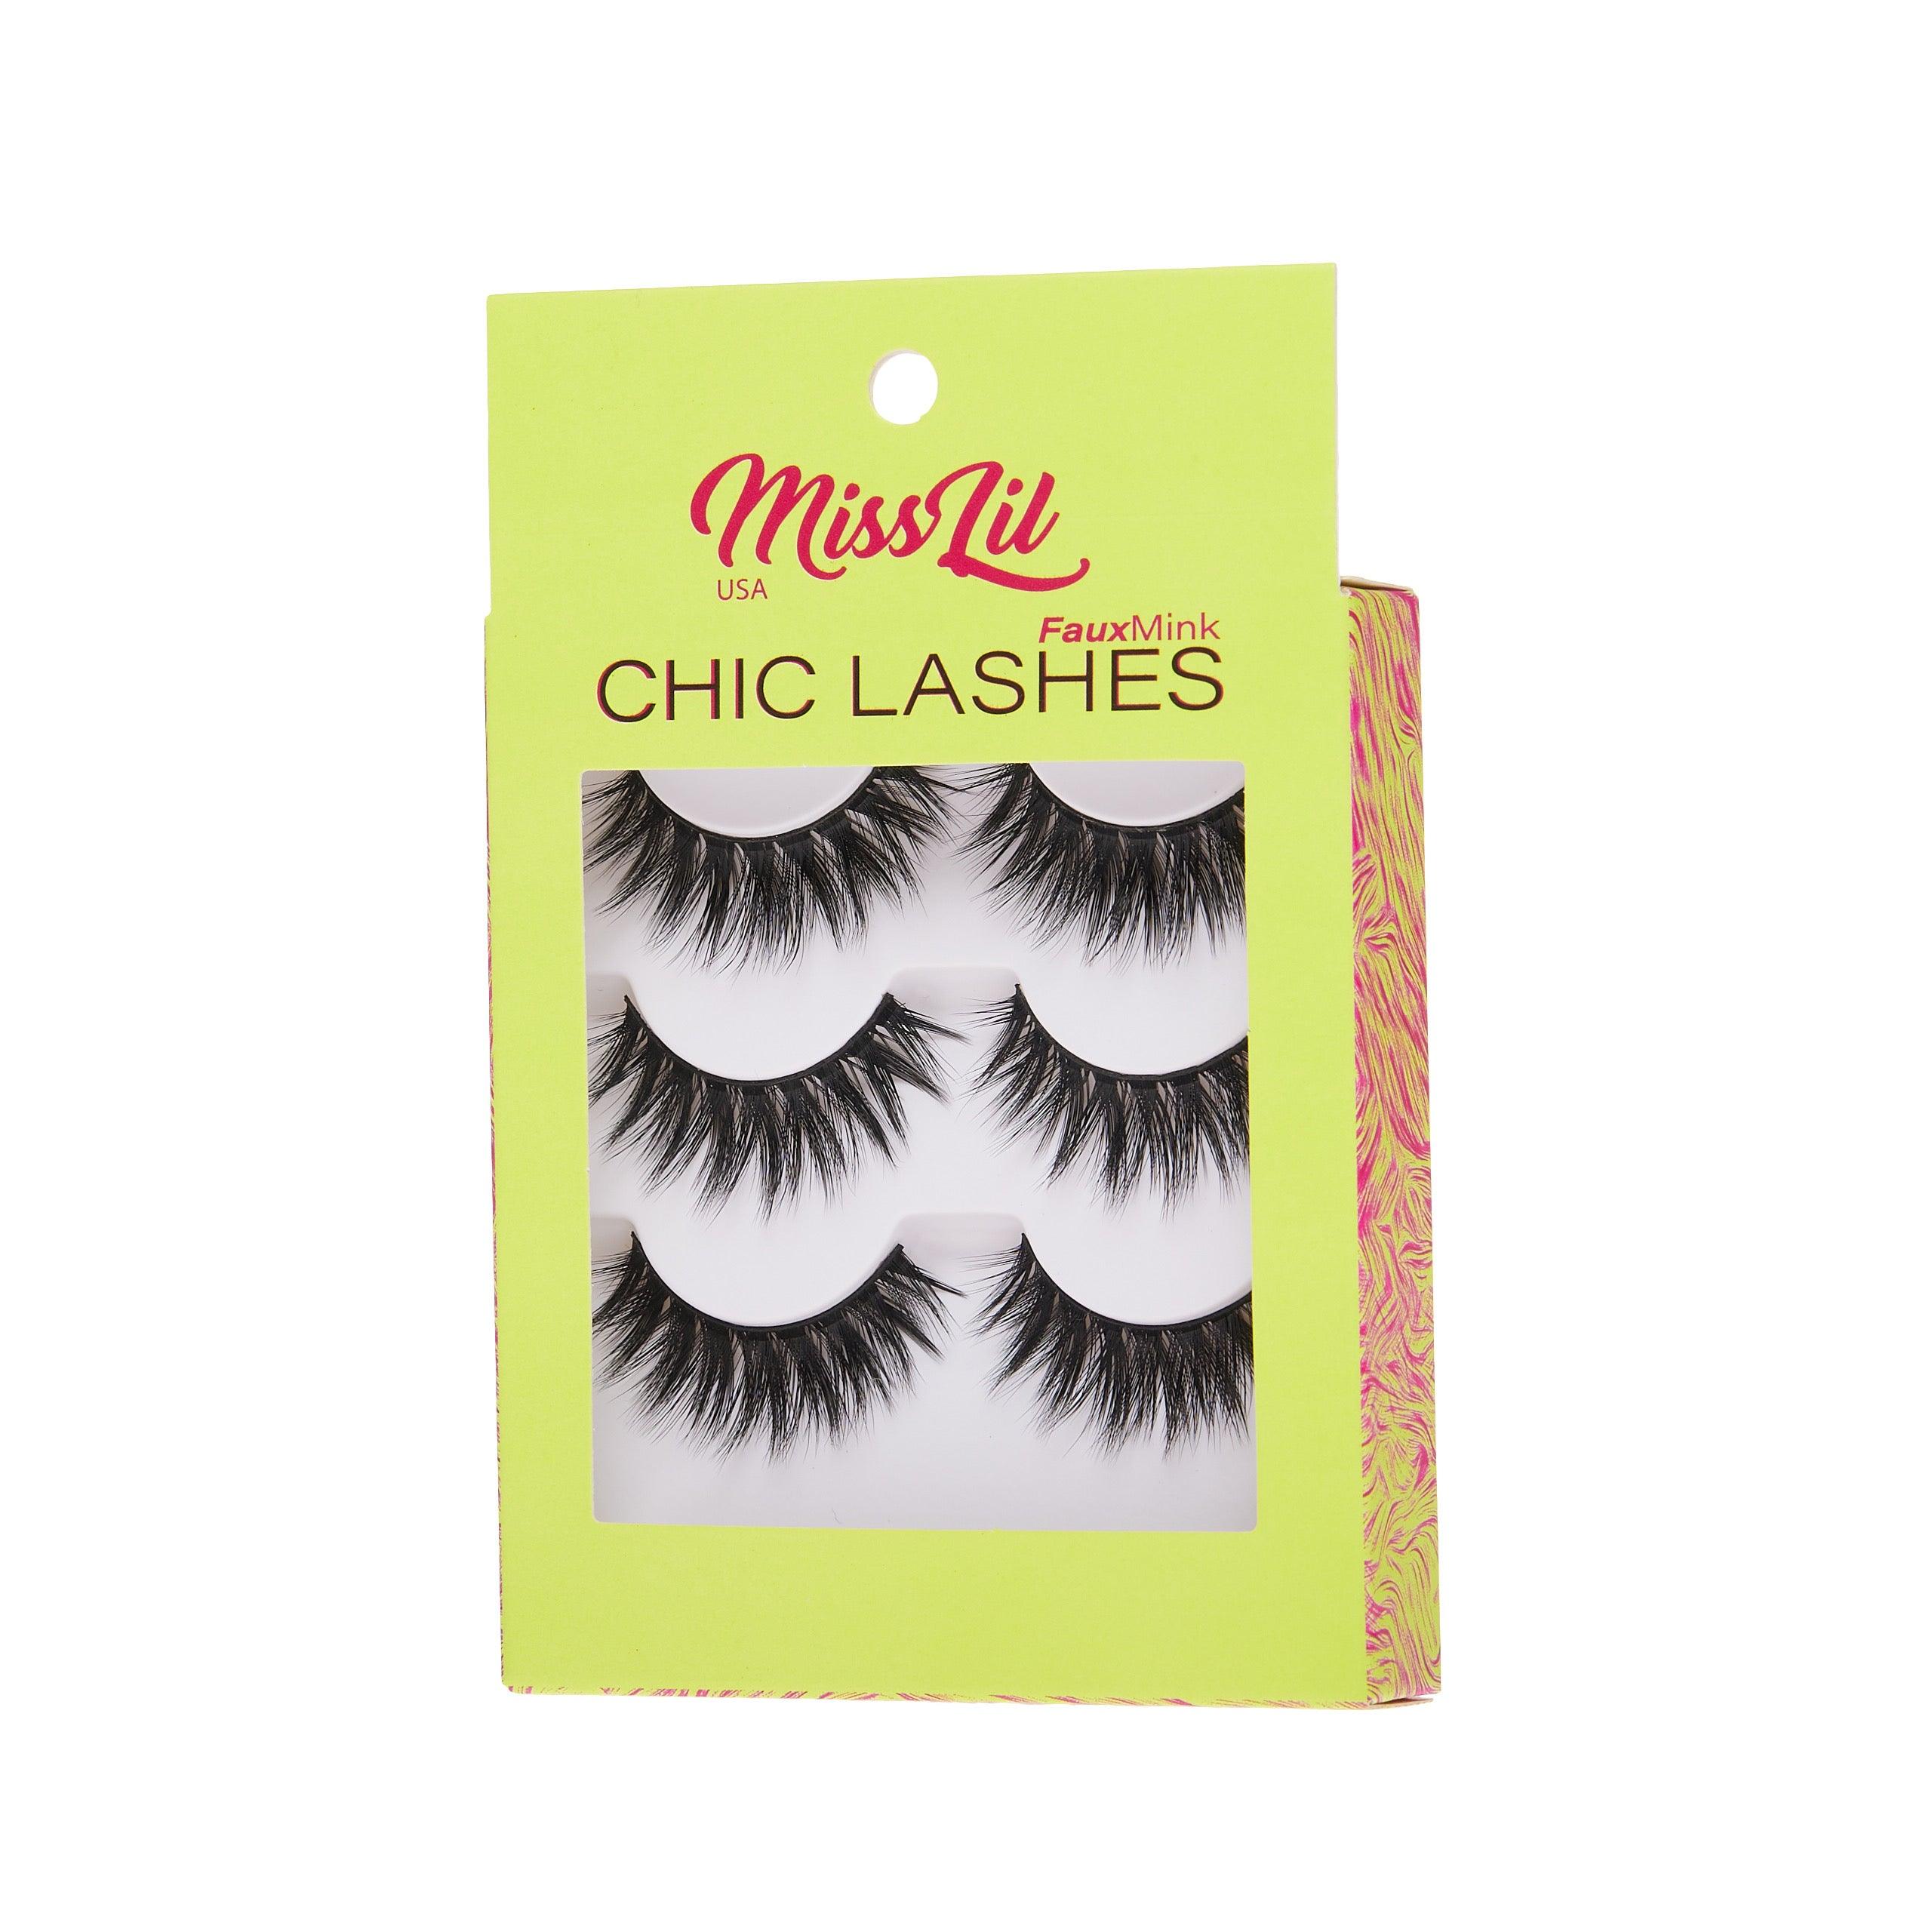 3-Pair Faux Mink Eyelashes - Chic Lashes Collection #11 - Pack of 3 - Miss Lil USA